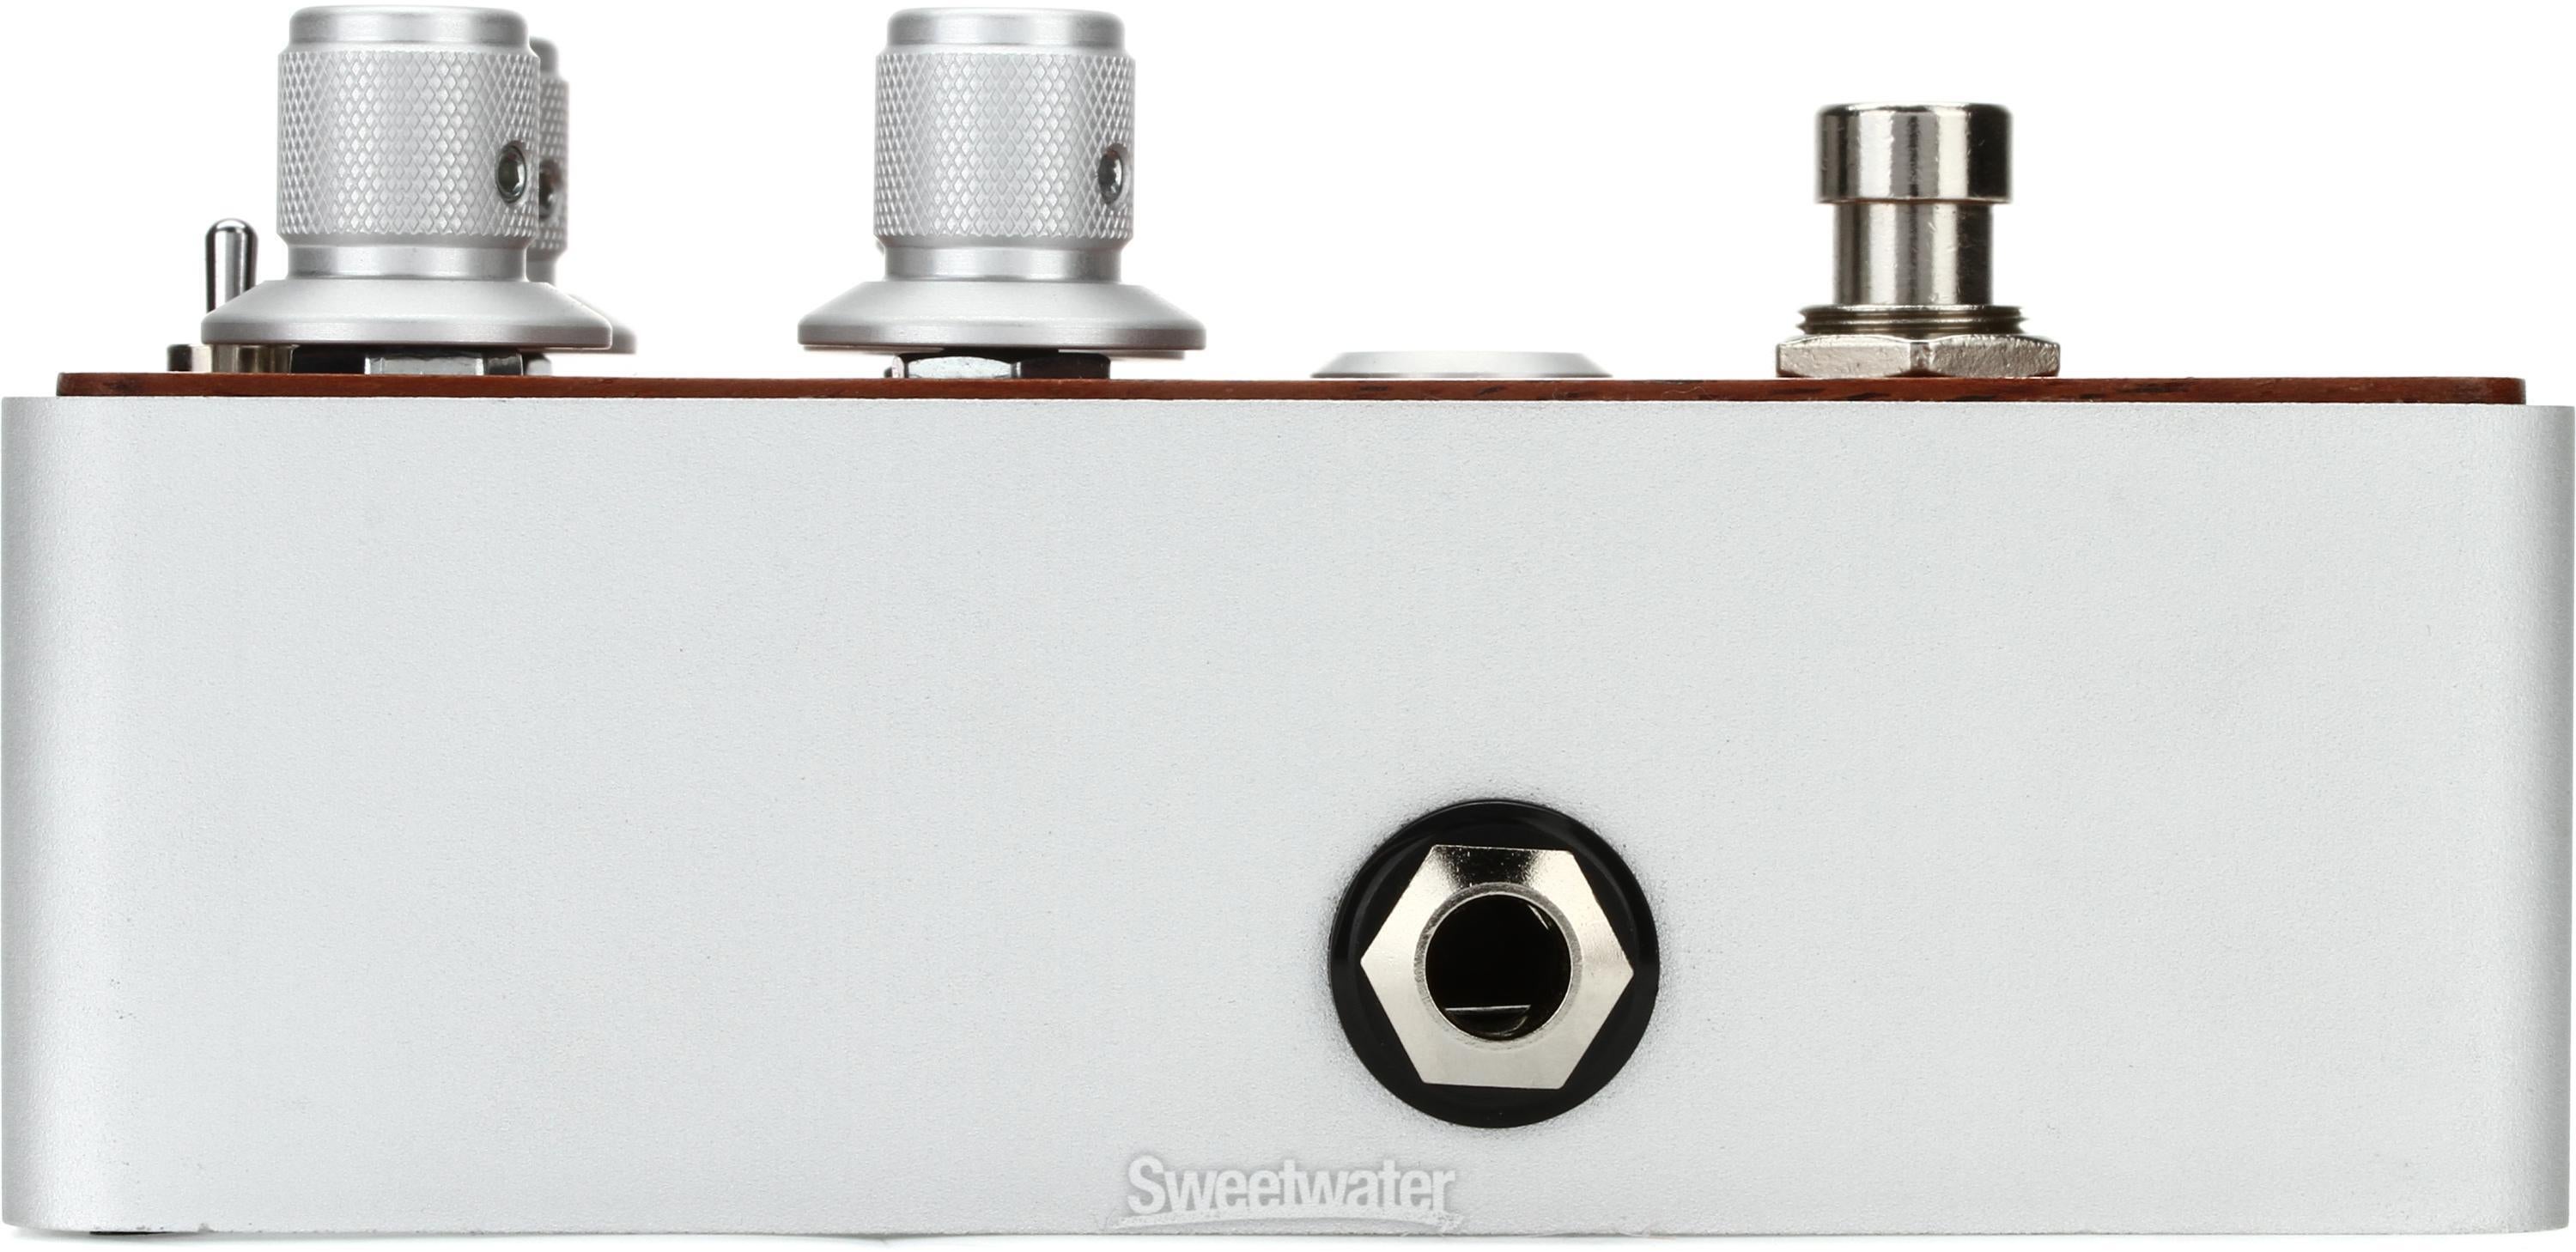 Bogner Wessex Overdrive Pedal - Bubinga Faceplate | Sweetwater